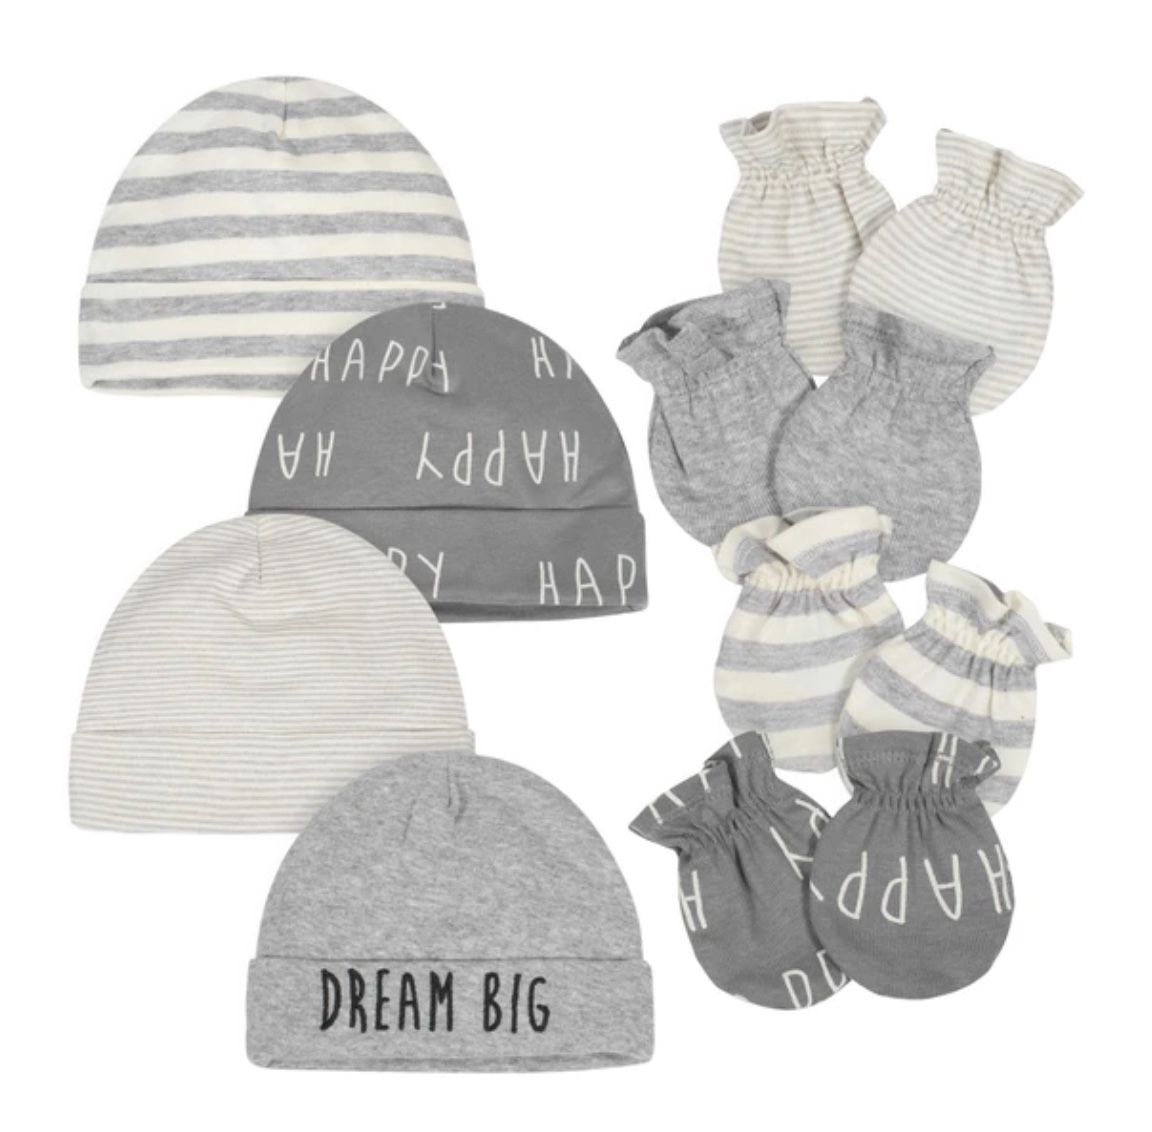 Let Gerber's Childrenswear Line Help You Prepare a Great Baby Shower Gift